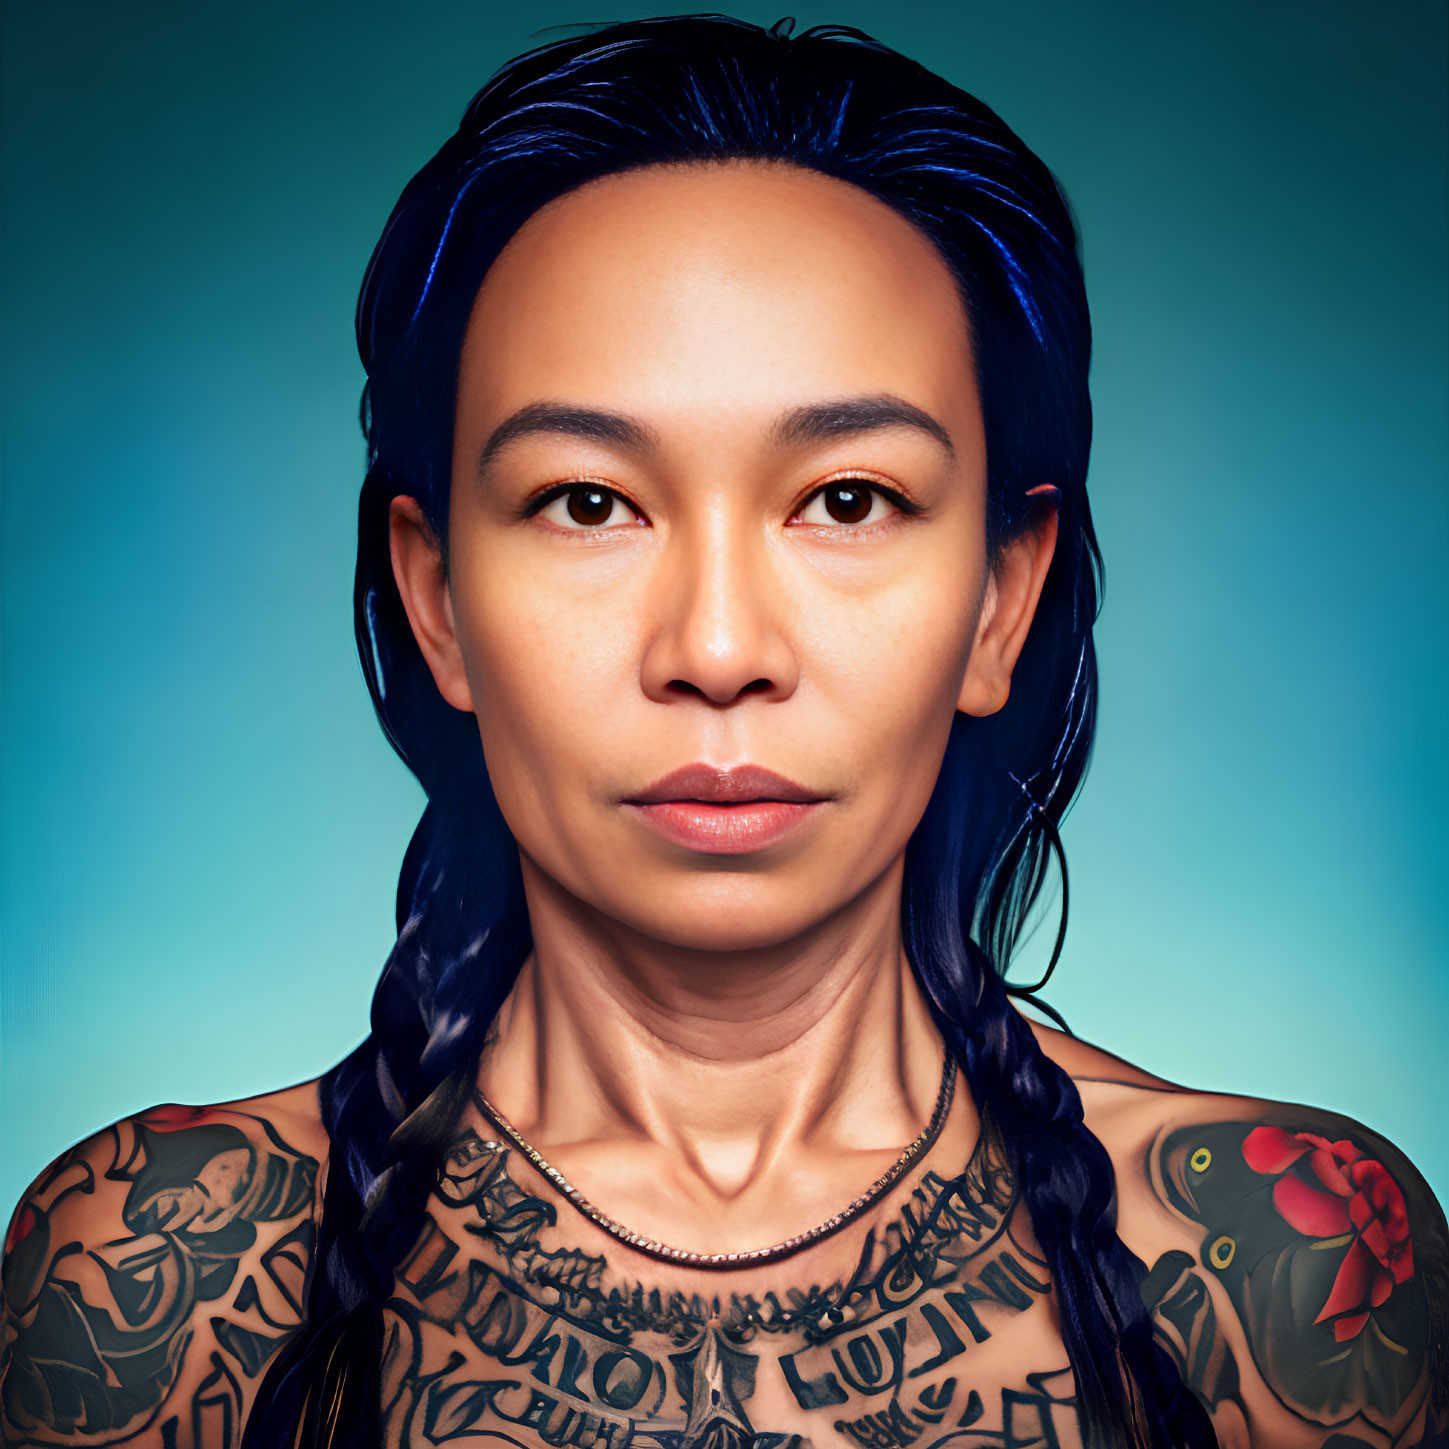 Portrait of person with tattoos and braided dark hair on blue background